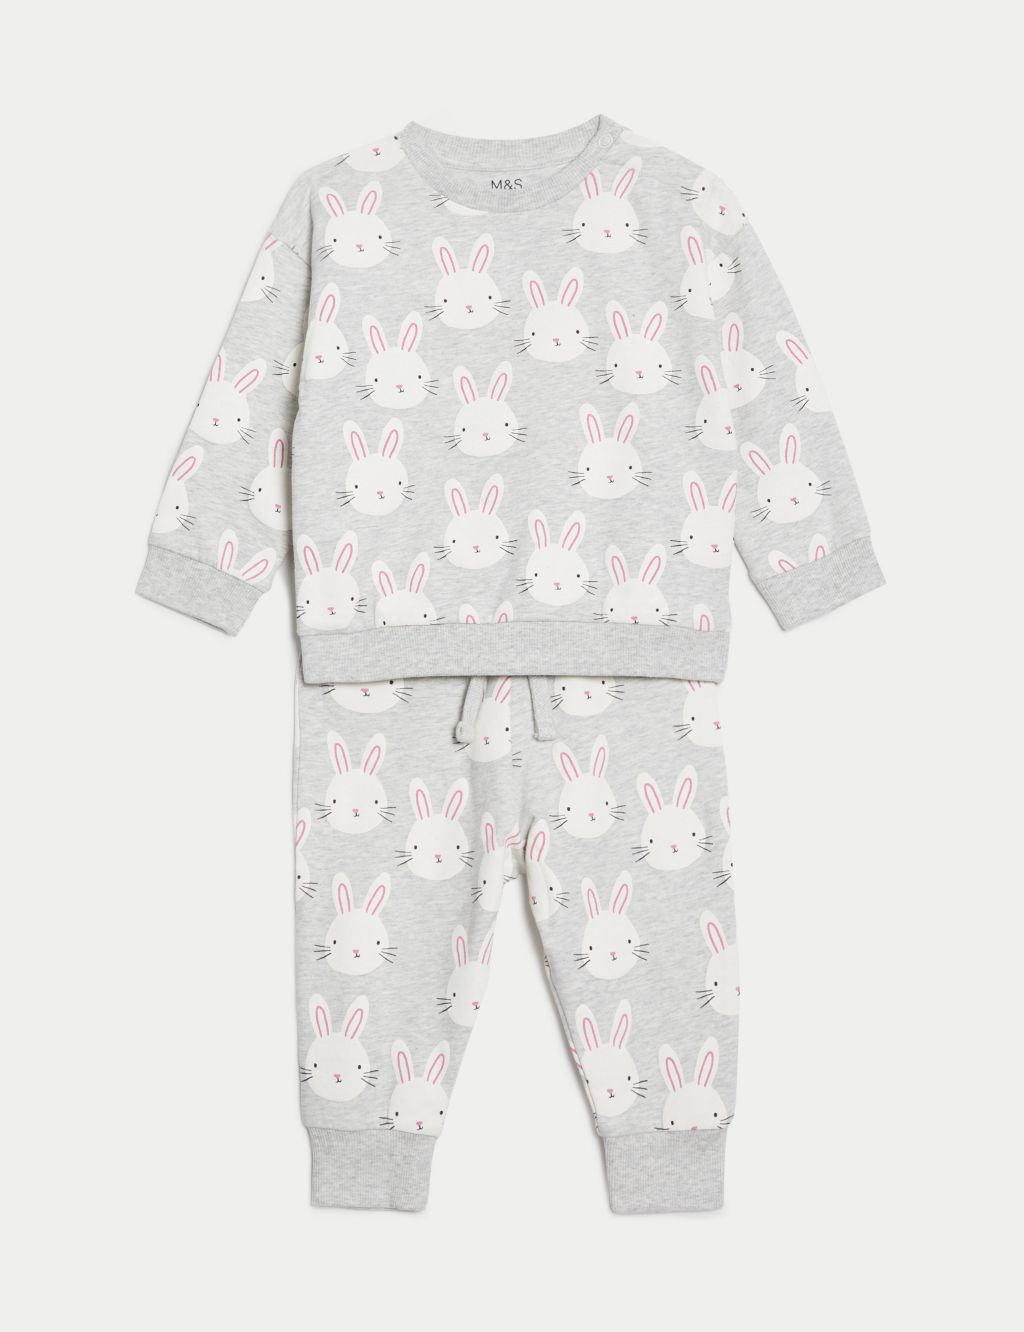 2pc Cotton Rich Bunny Print Outfit (0-3 Yrs) image 1